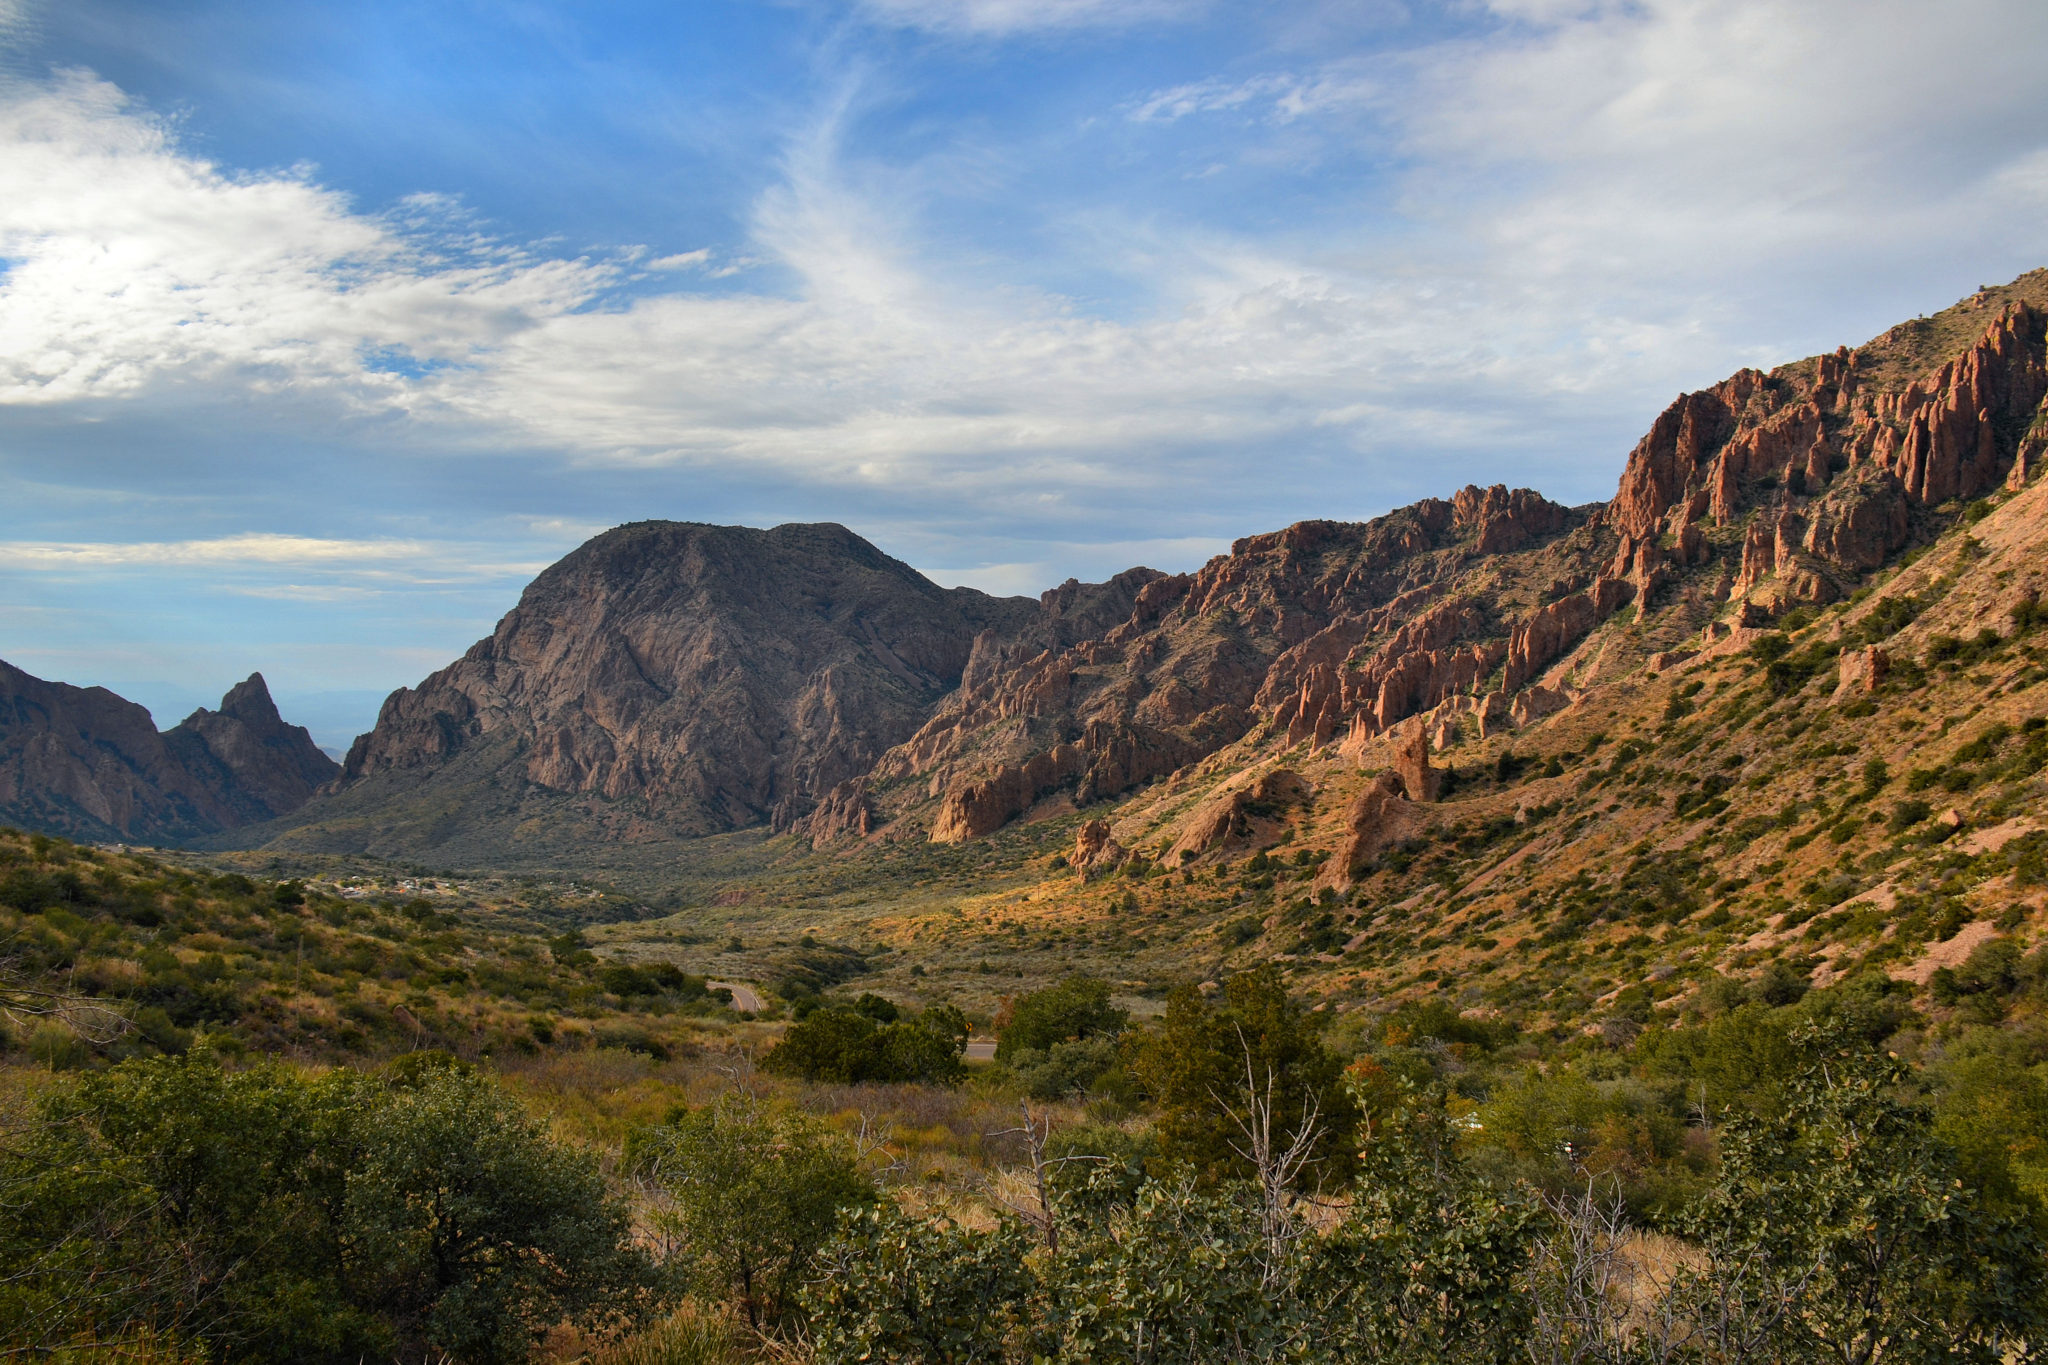 View of Chisos Basin from the road